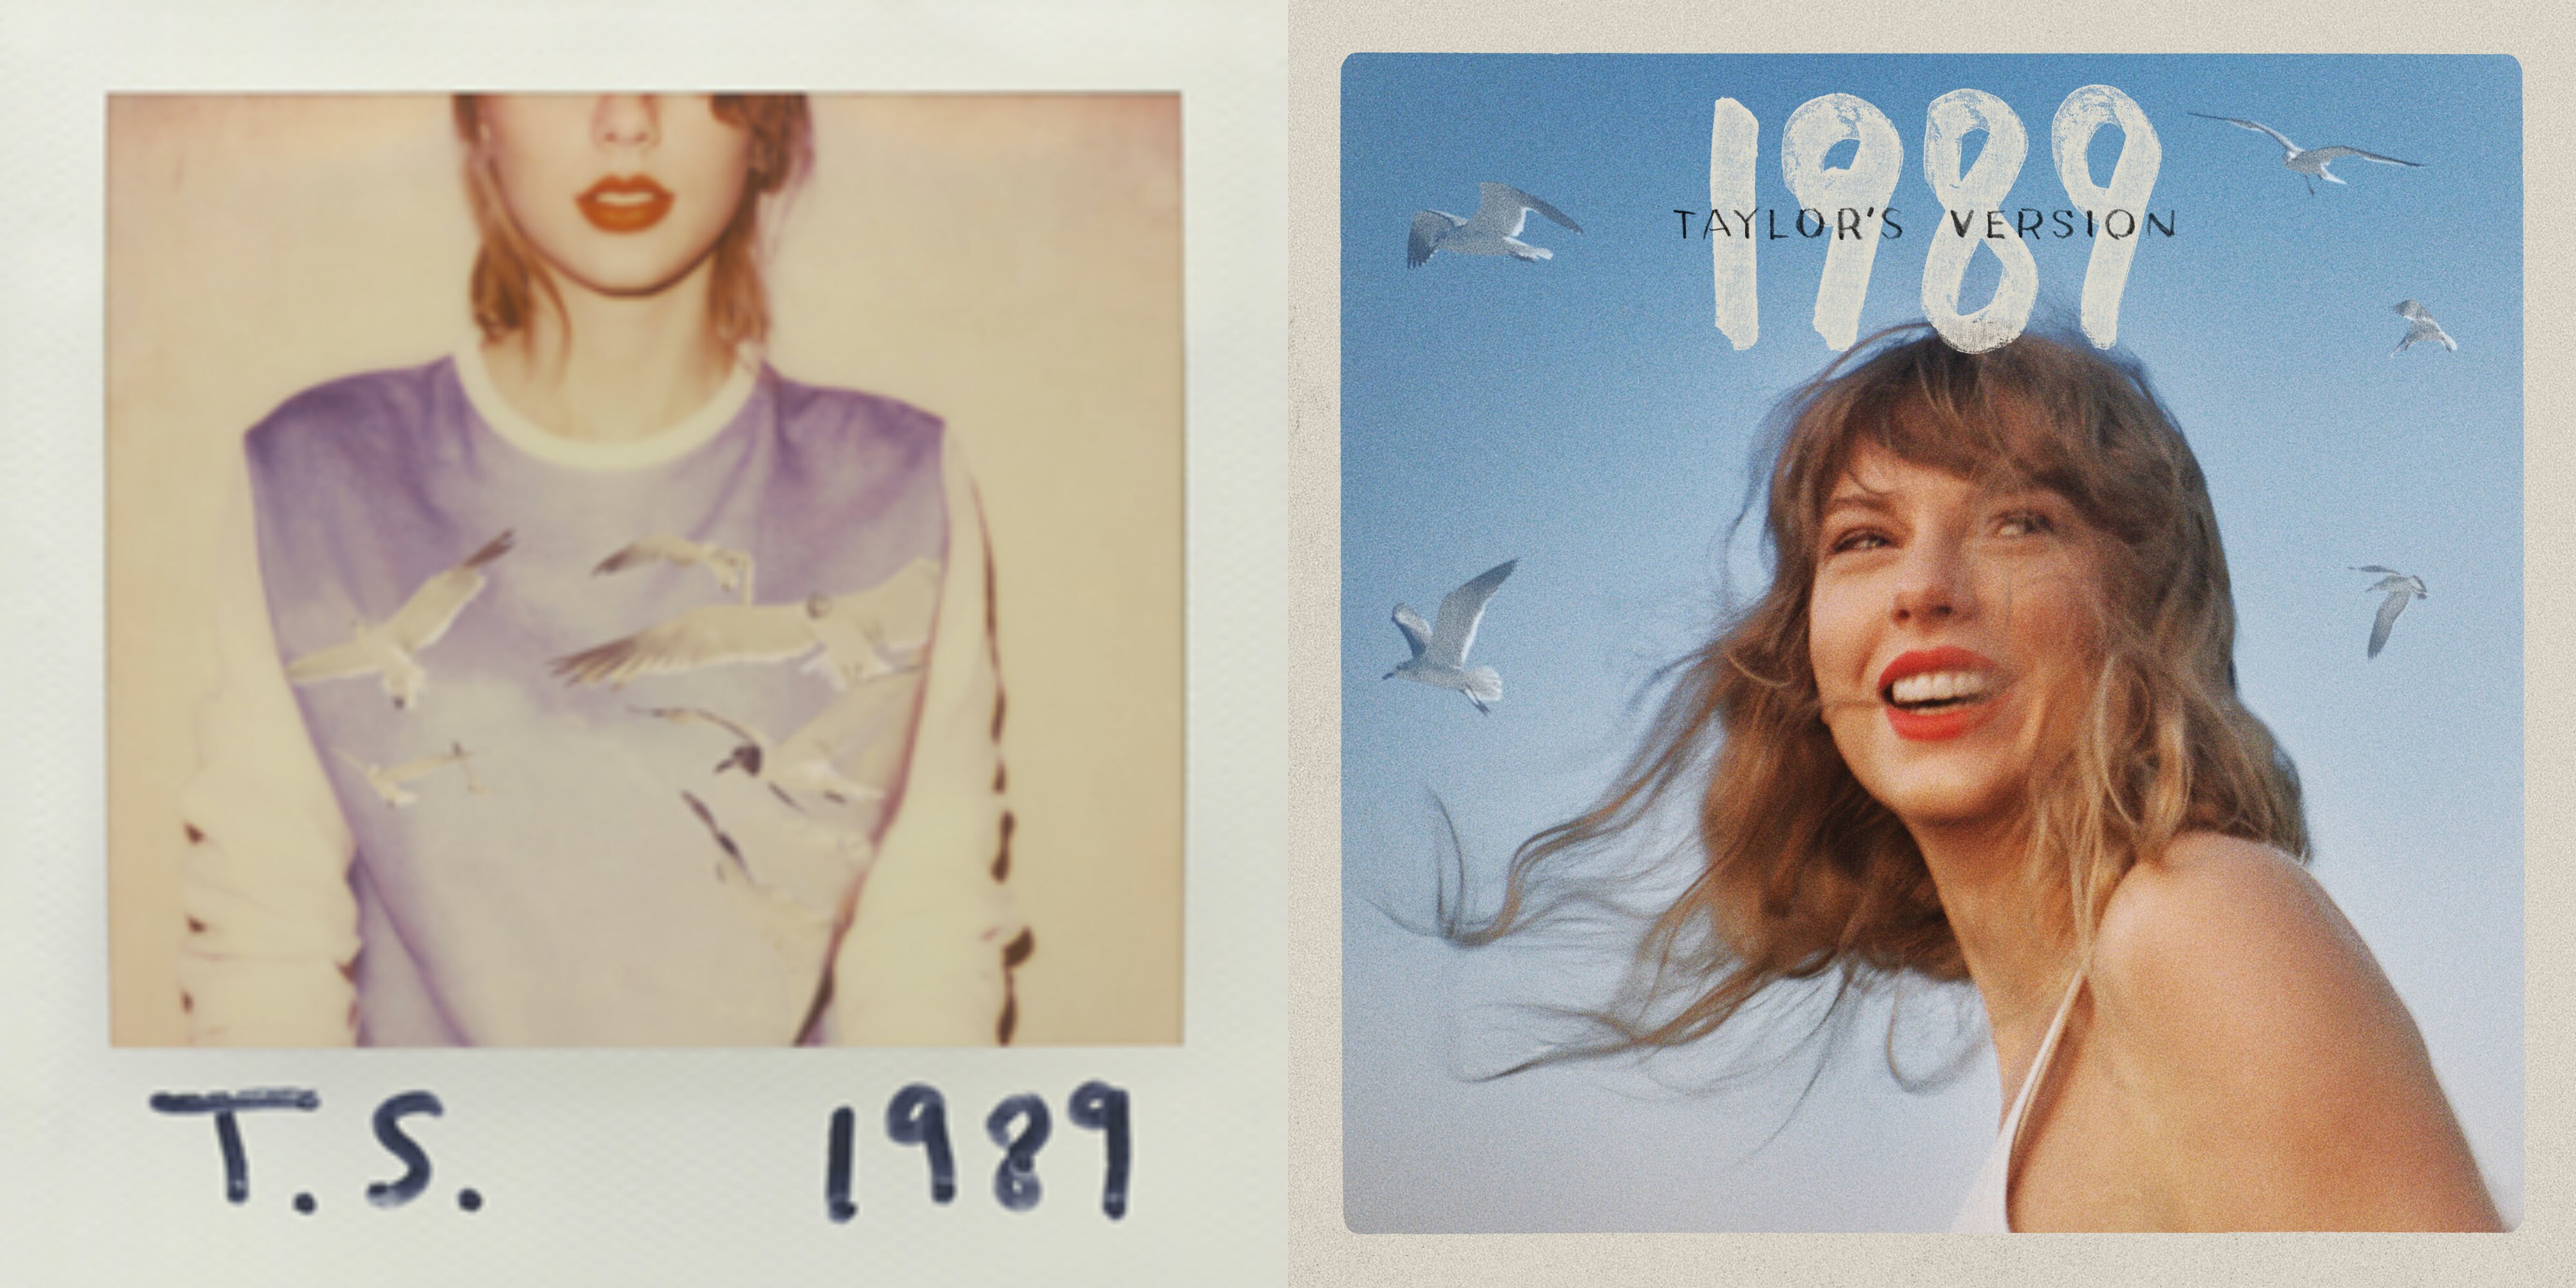 A composite image of Taylor's first 1989 album cover next to her new one.